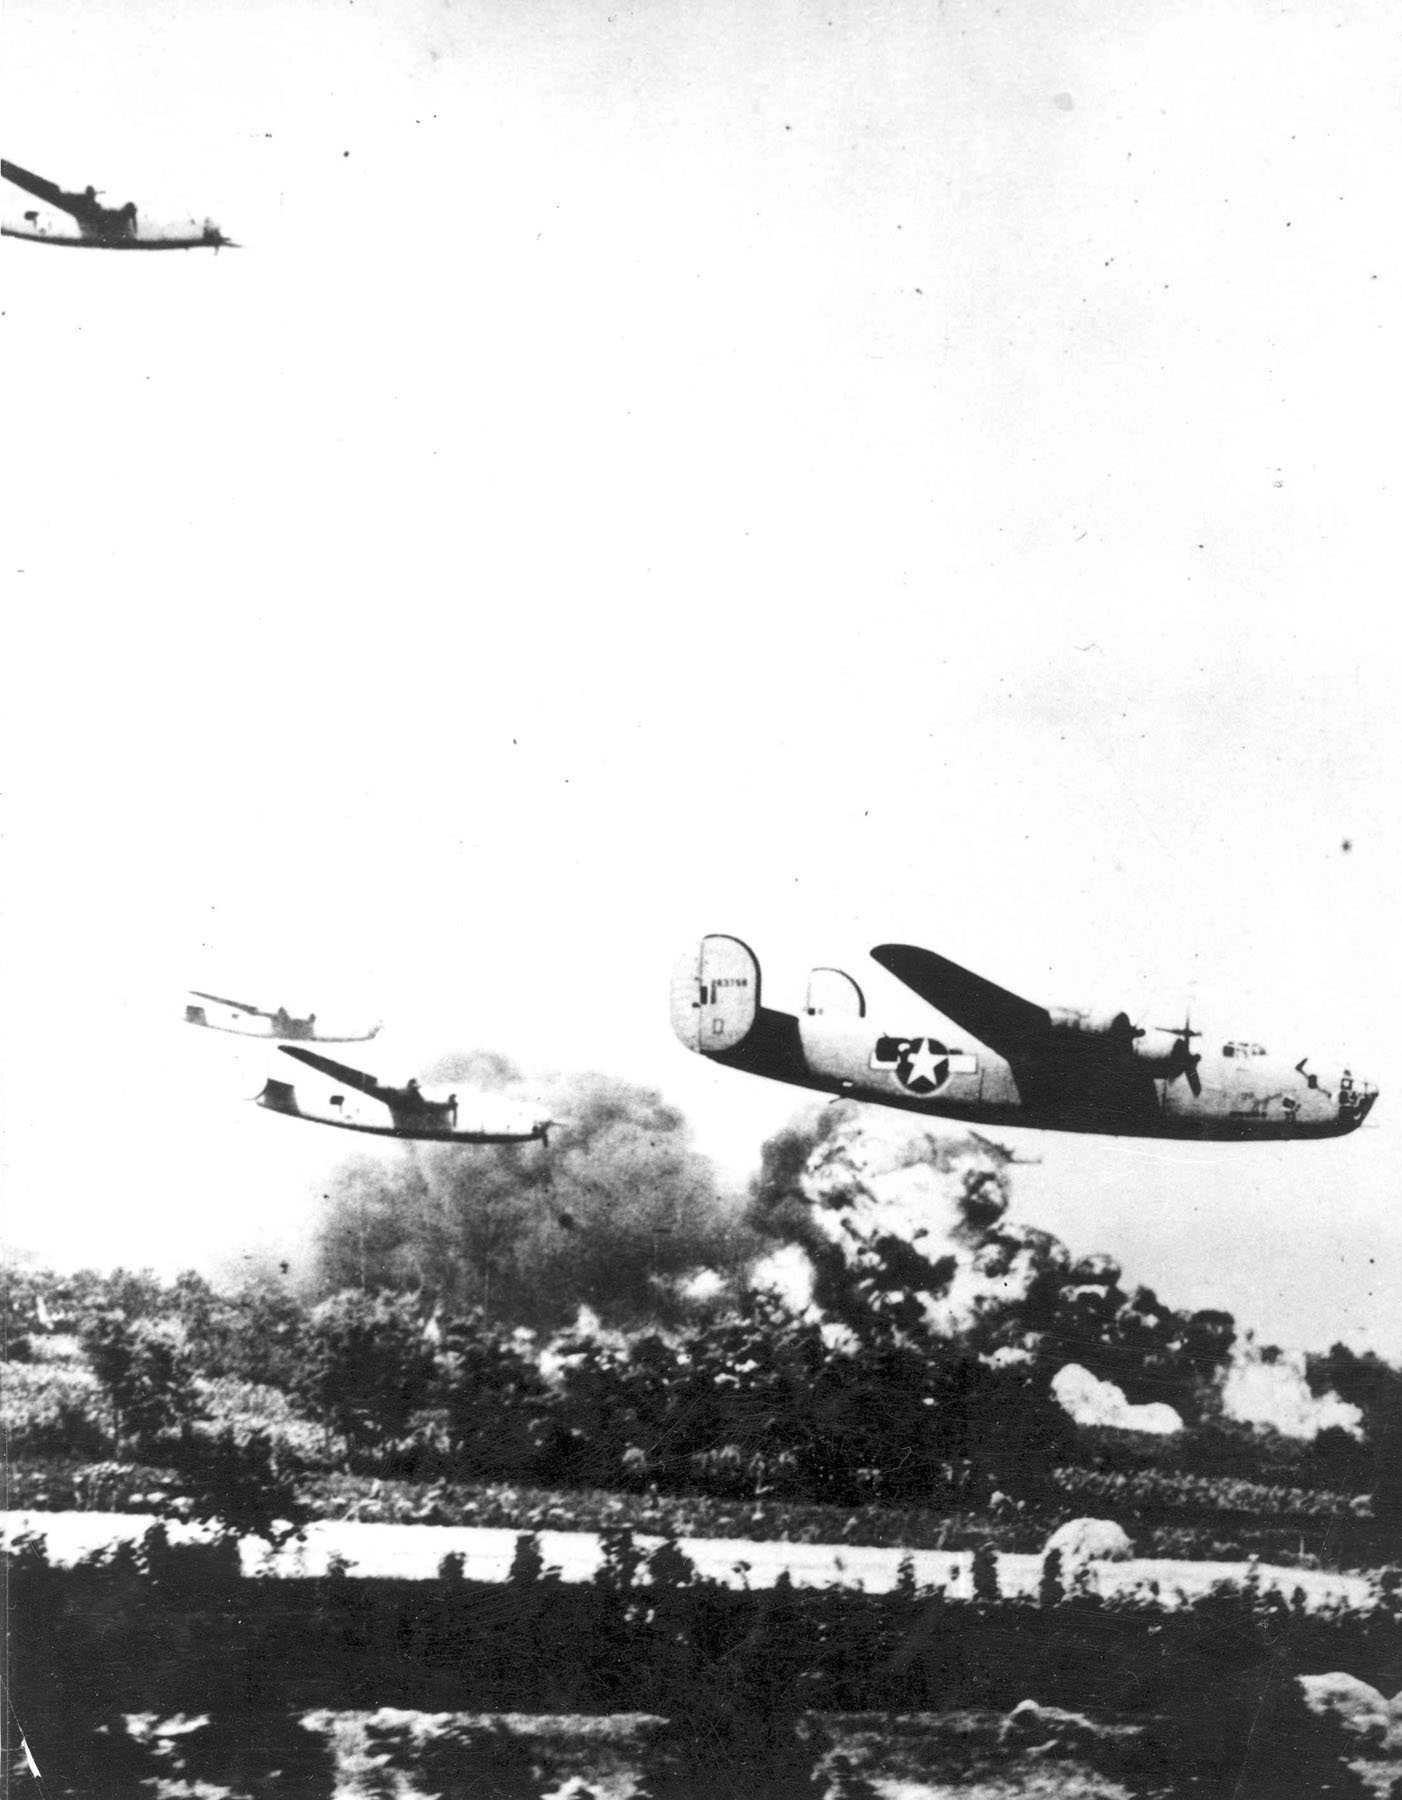 Consolidated B-24D Liberator very long range heavy bombers attack the oil refineries at Ploesti, Romania, 1 August 1943. (U.S. Air Force)